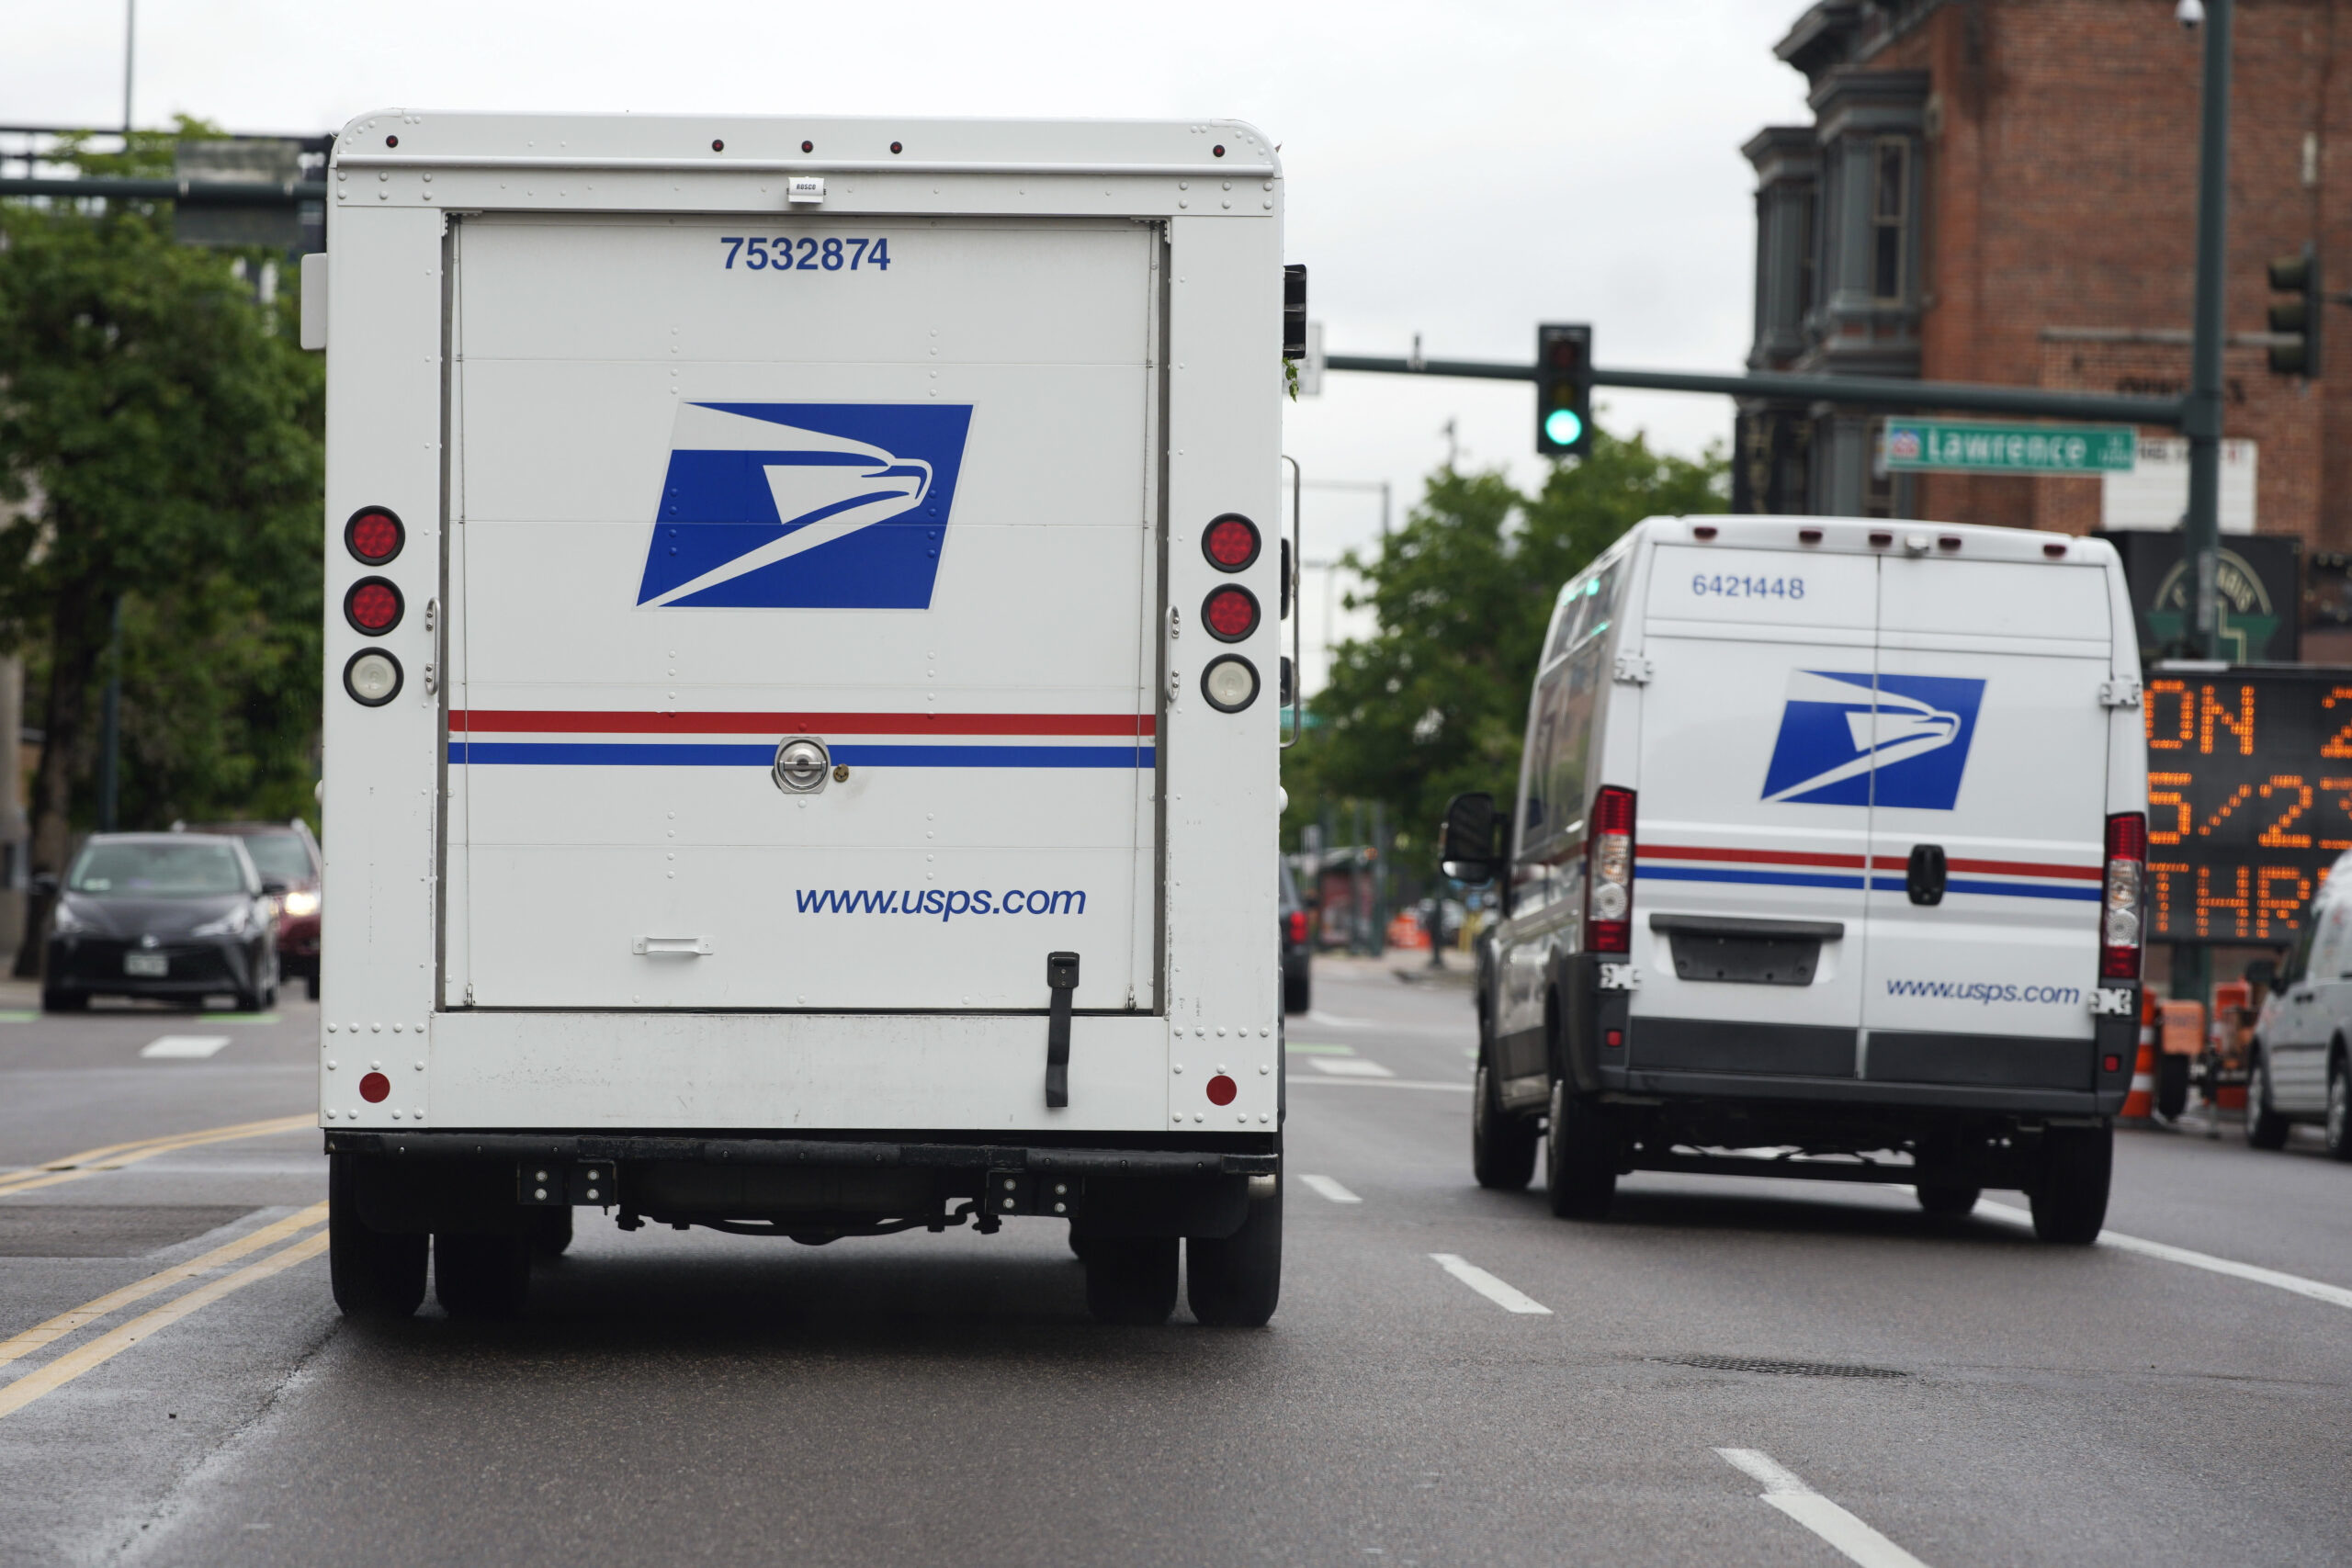 FILE - A USPS logo adorns the back doors of United States Postal Service delivery vehicles as they proceed westbound along 20th Street from Stout Street and the main post office in downtown Denver, Wednesday, June 1, 2022. USPS is creating a division to handle election mail issues as part of an effort to ensure swift and secure delivery of ballots for the 2022 midterm election, officials said Wednesday, July 27, 2022. (AP Photo/David Zalubowski, File)